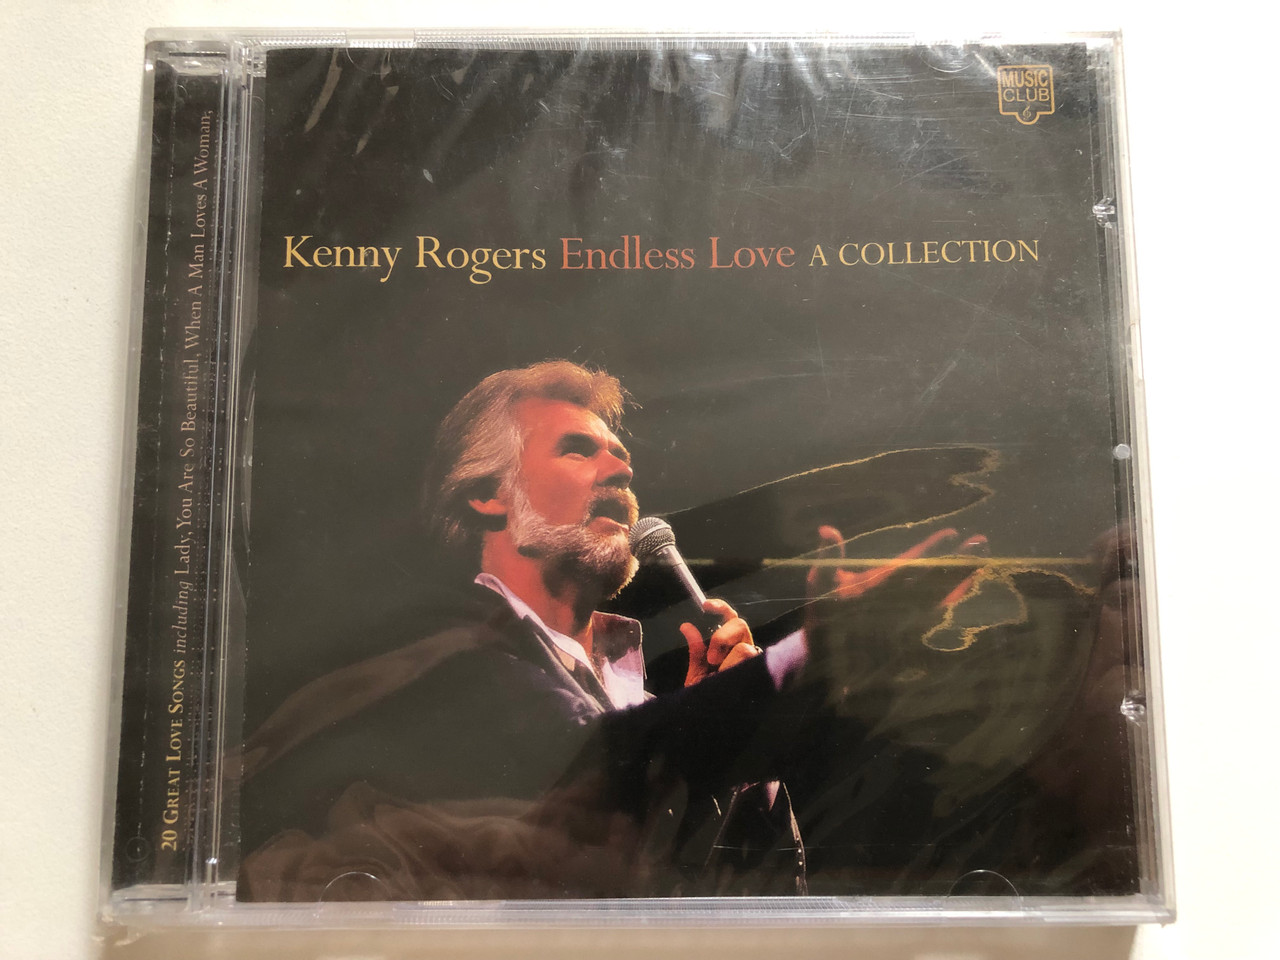 https://cdn10.bigcommerce.com/s-62bdpkt7pb/products/0/images/306583/Kenny_Rogers_Endless_Love_-_A_Collection_Music_Club_Audio_CD_1999_MCCD410_1__83908.1698312039.1280.1280.JPG?c=2